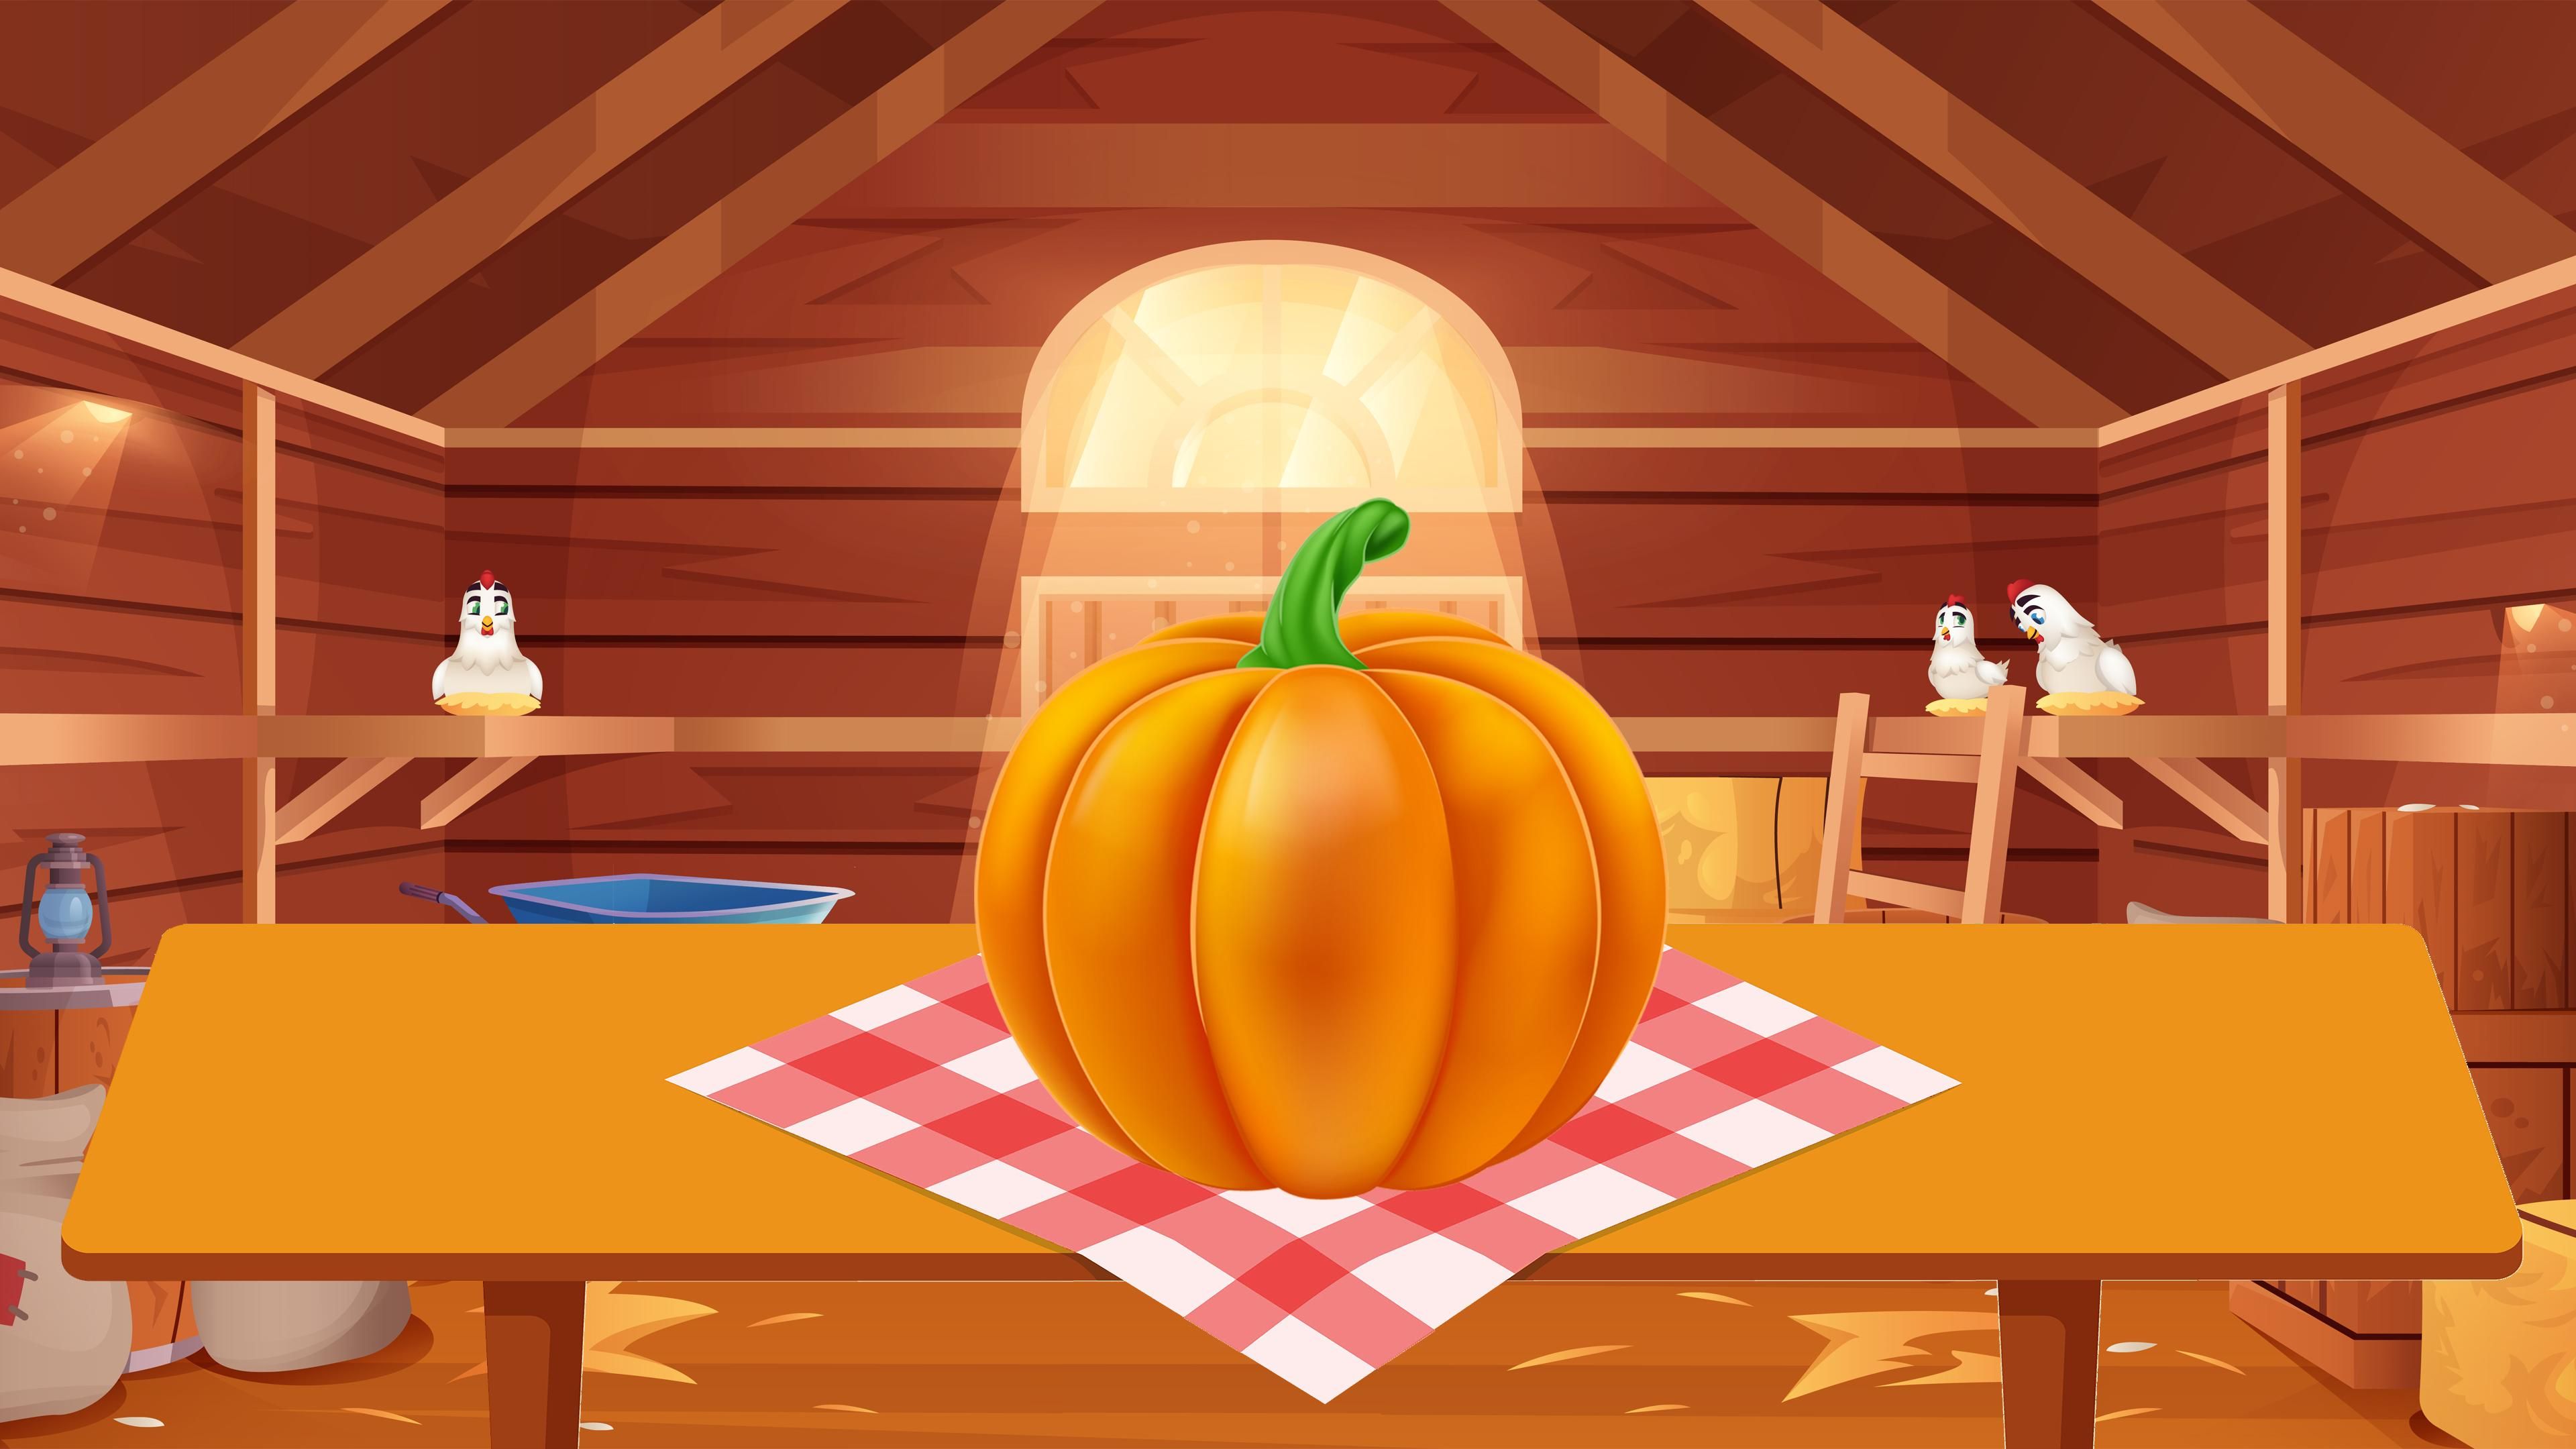 The Jumping Pumpkin cover image